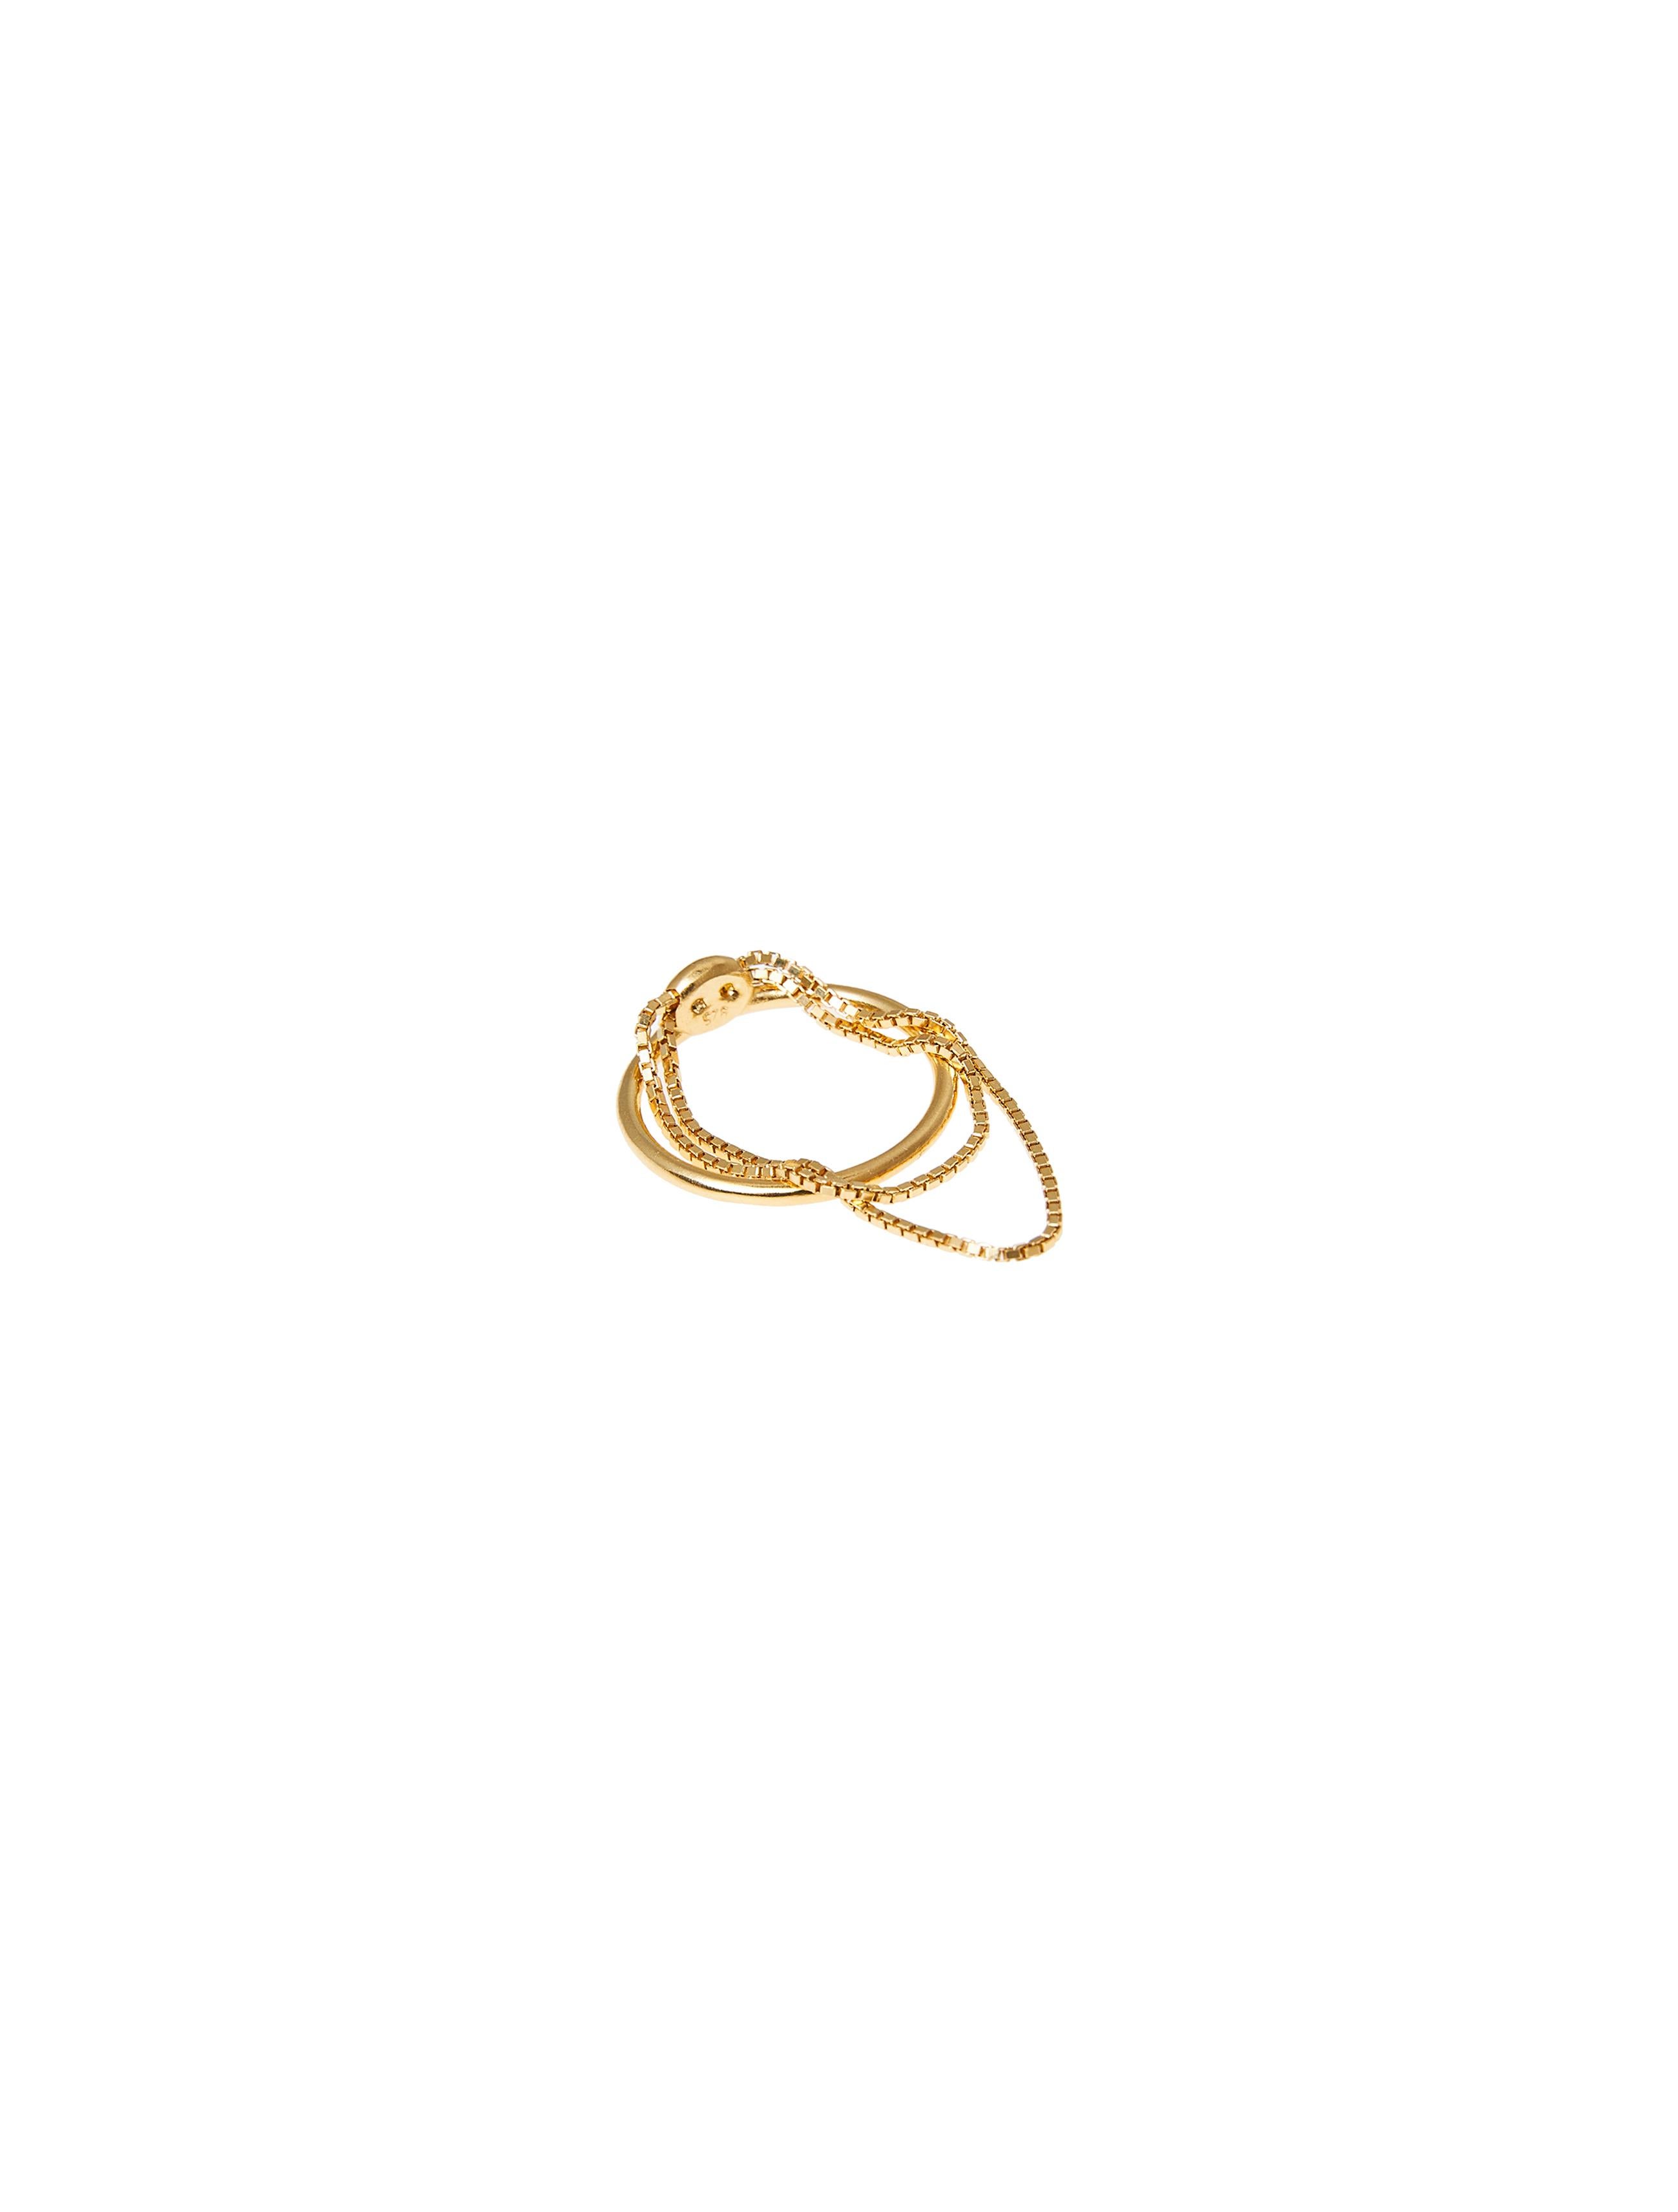 Currents ring 

We added movement to the classic ring band by adding two box chains. The perfect balance of a classic and a modern design. Hand-crafted by local skilled Greek craftsmen.

This design is part of the Glow collection which is inspired